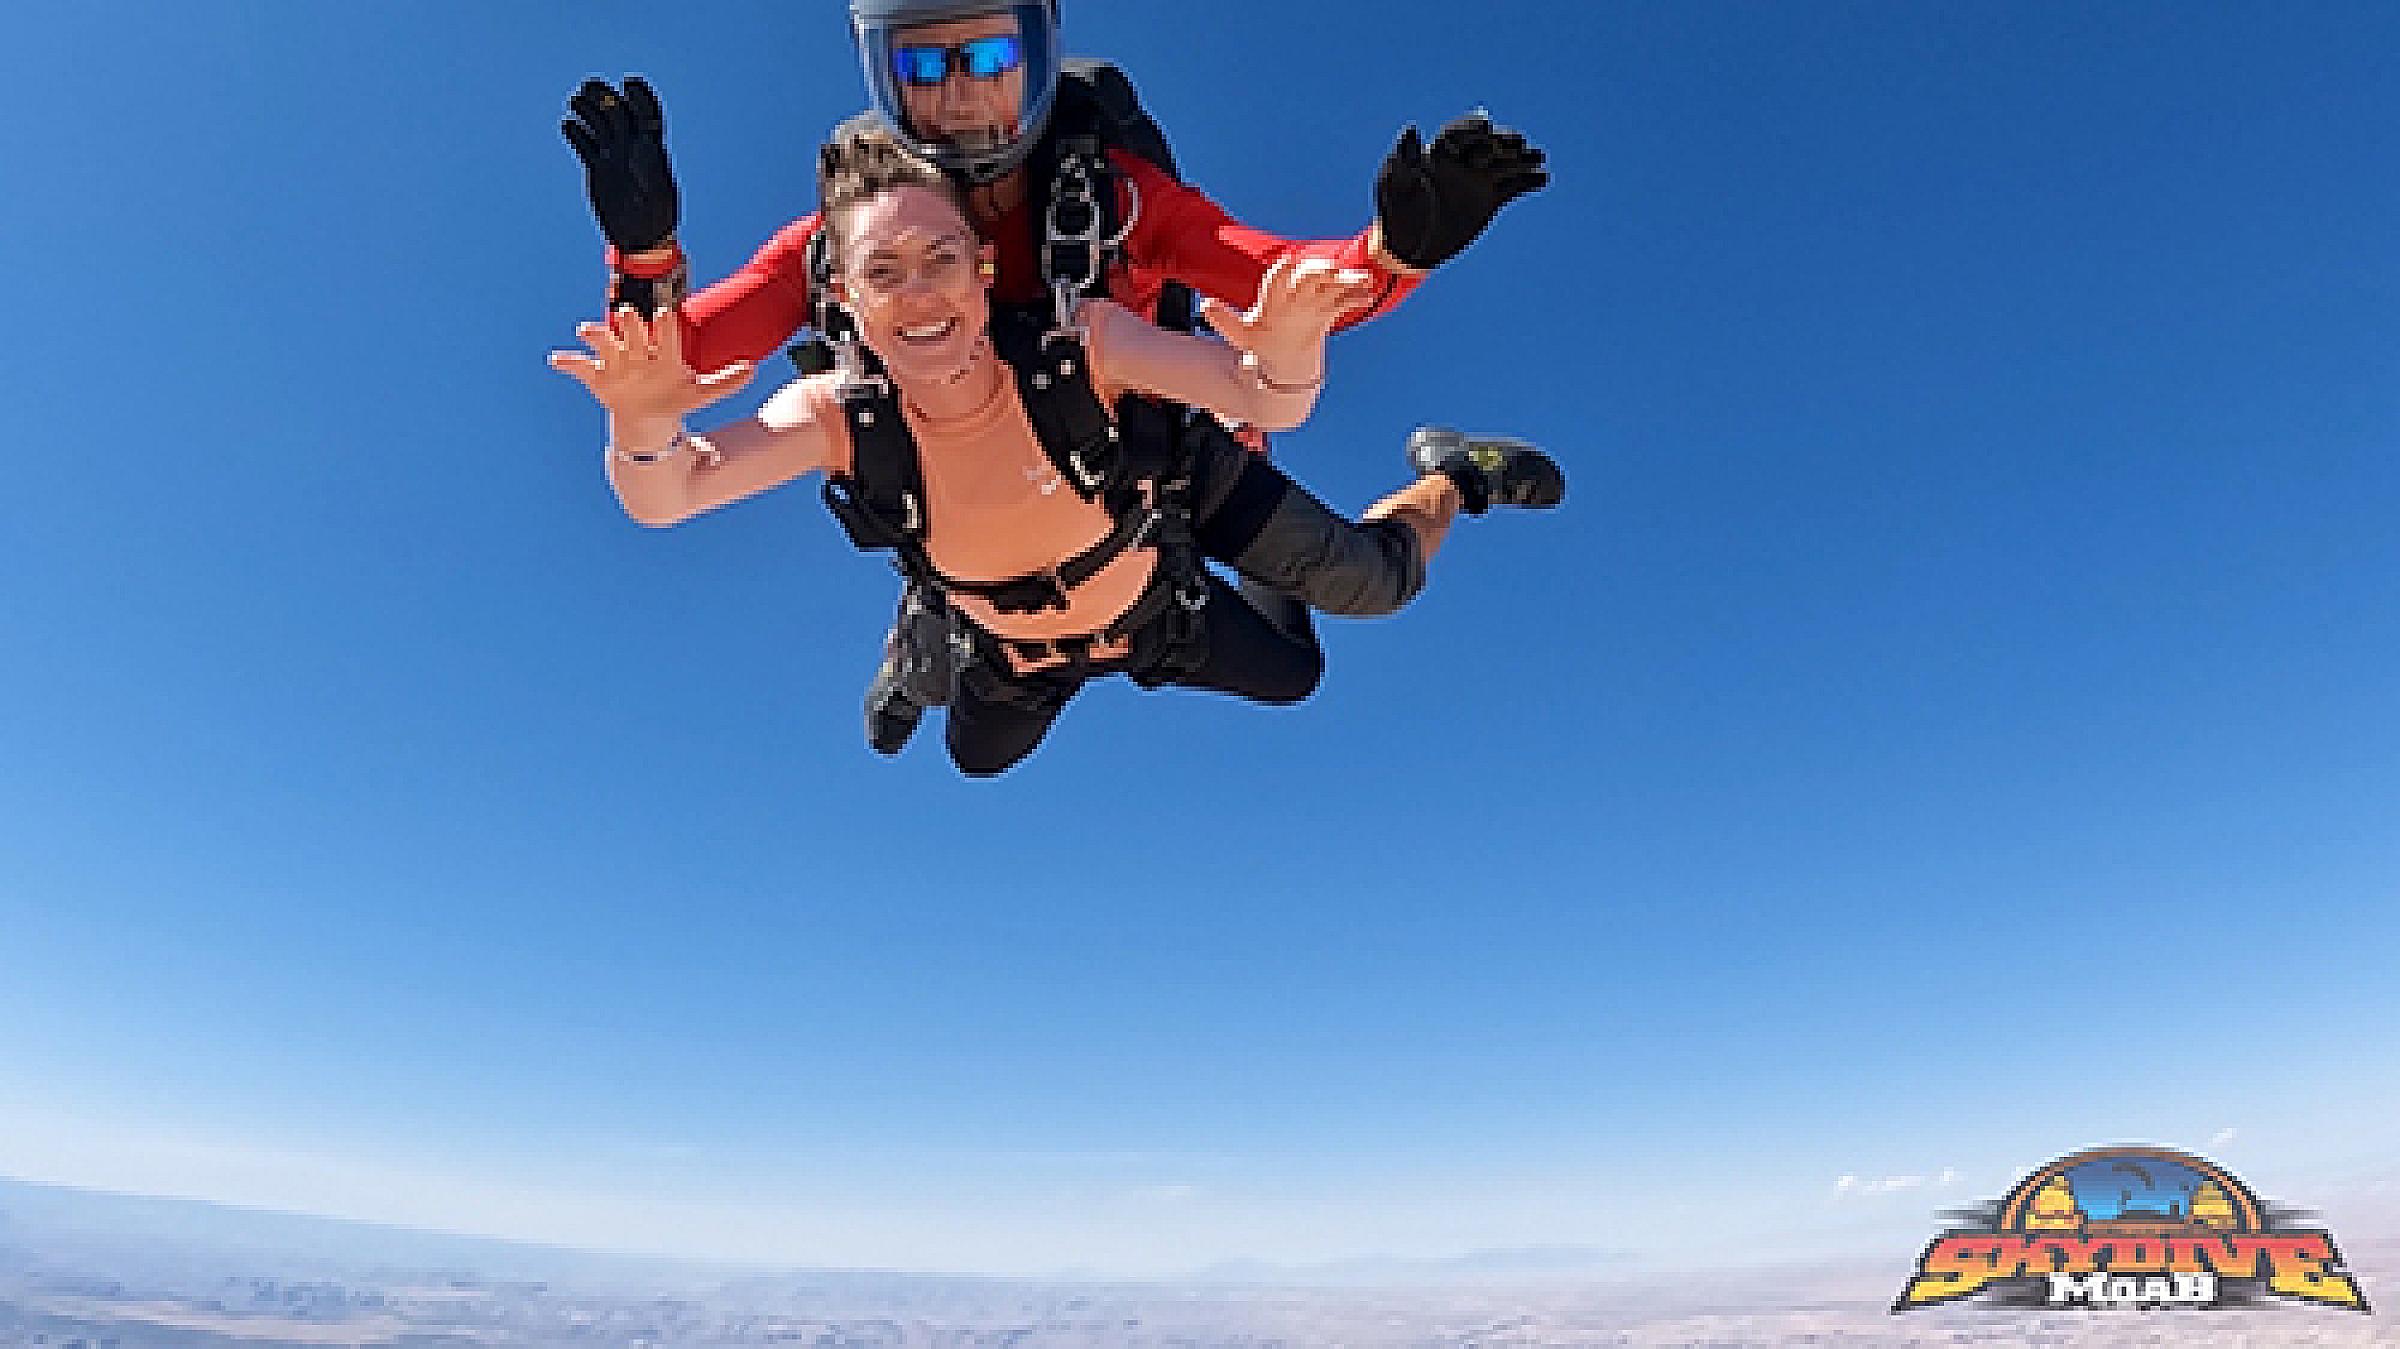 Erin Hurst skydiving in tandem with her instructor at Skydive Moab